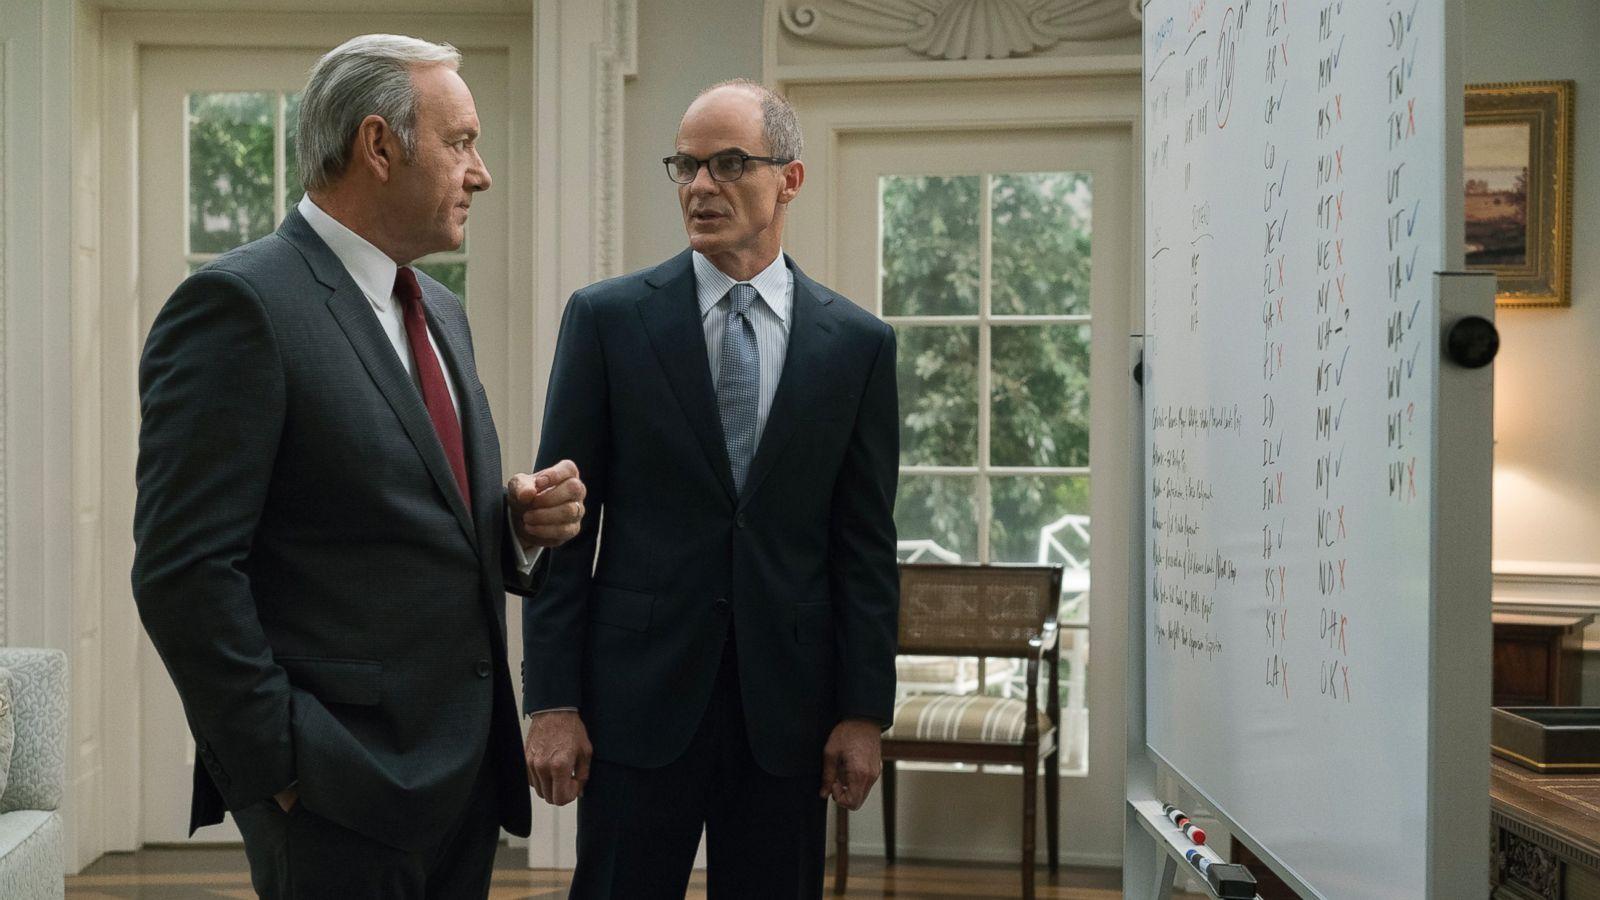 House of Cards': How far does Doug Stamper's loyalty go